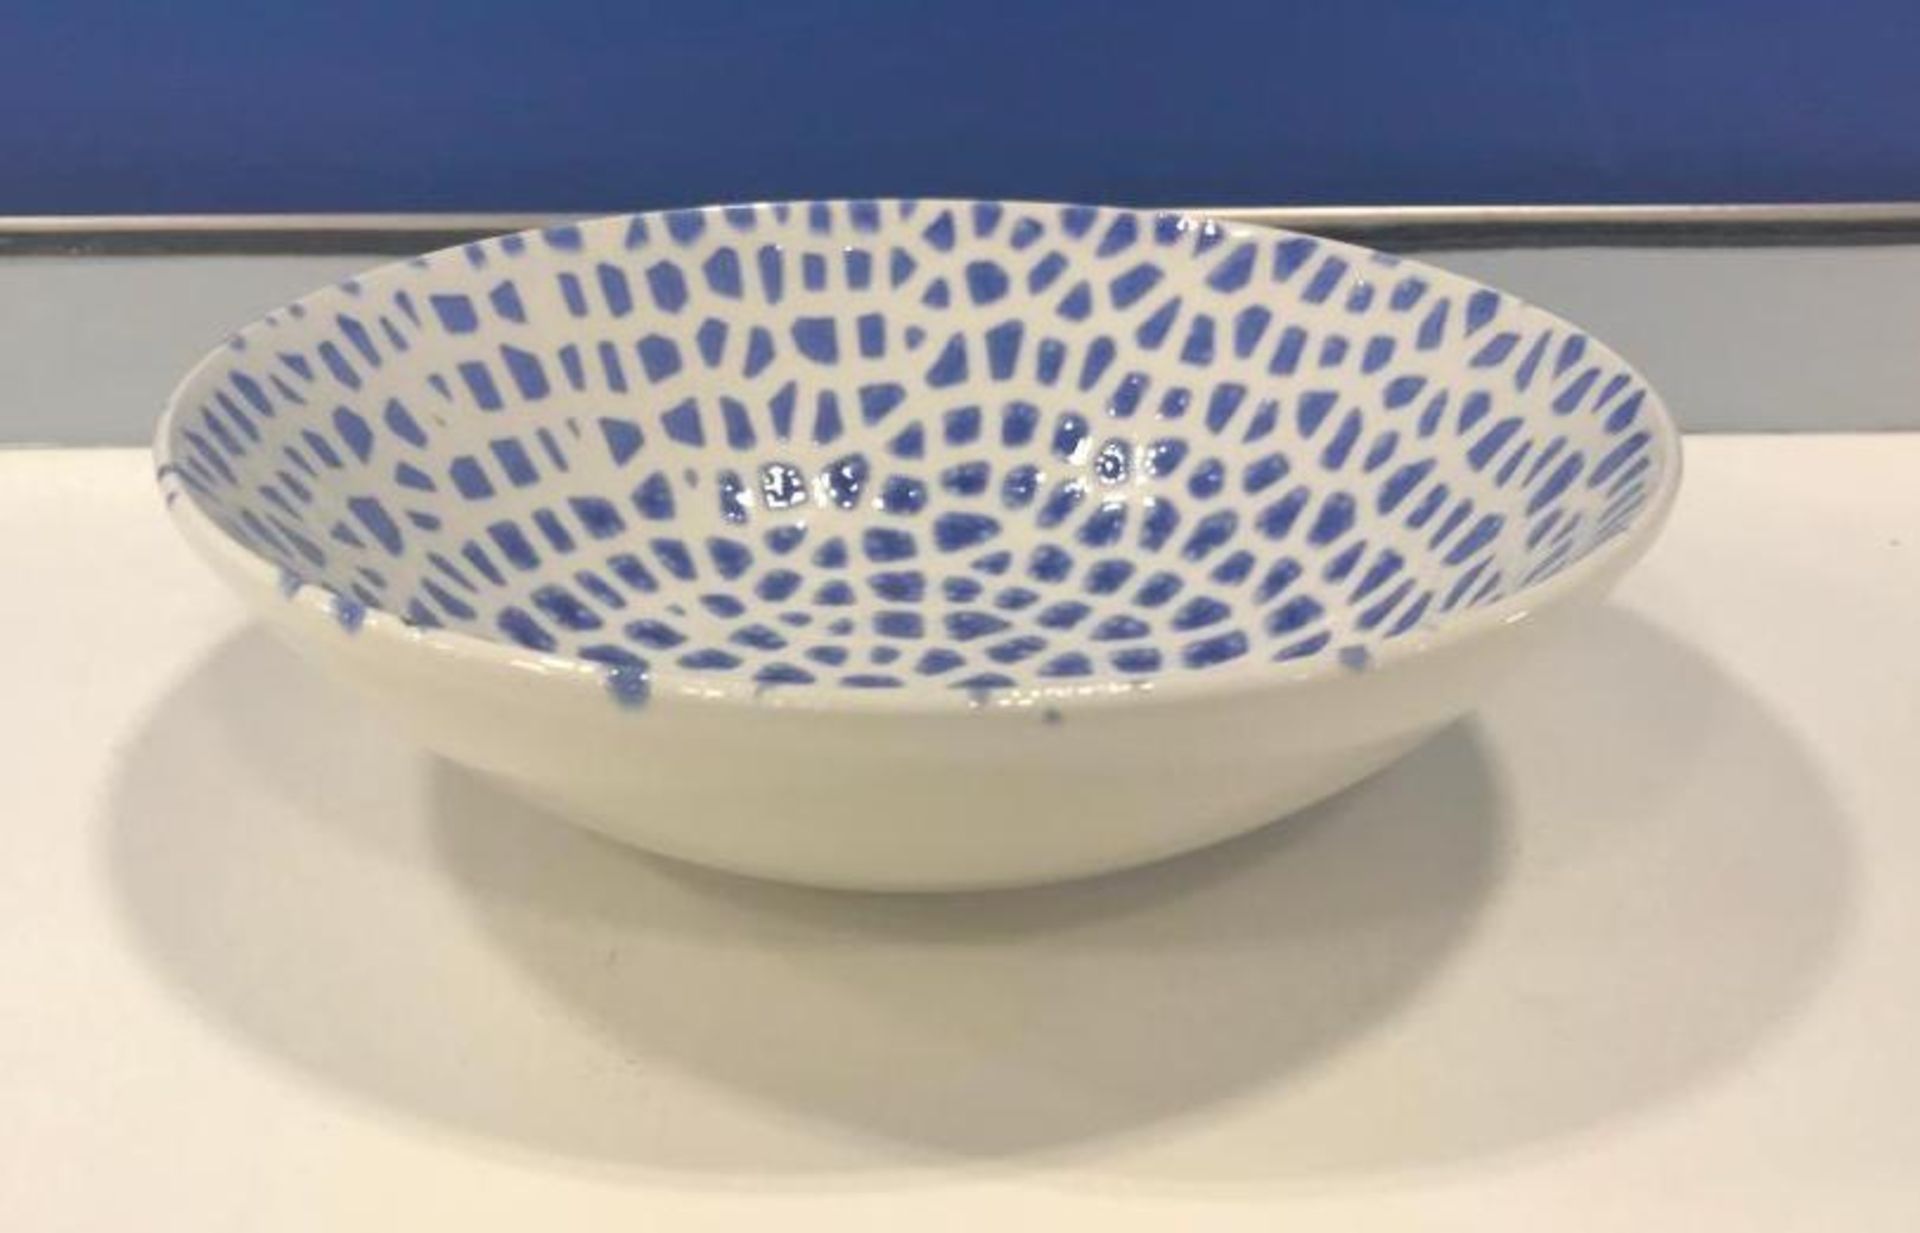 DUDSON MOSAIC BLUE CHEF'S BOWL 8" - 12/CASE, MADE IN ENGLAND - Image 4 of 6